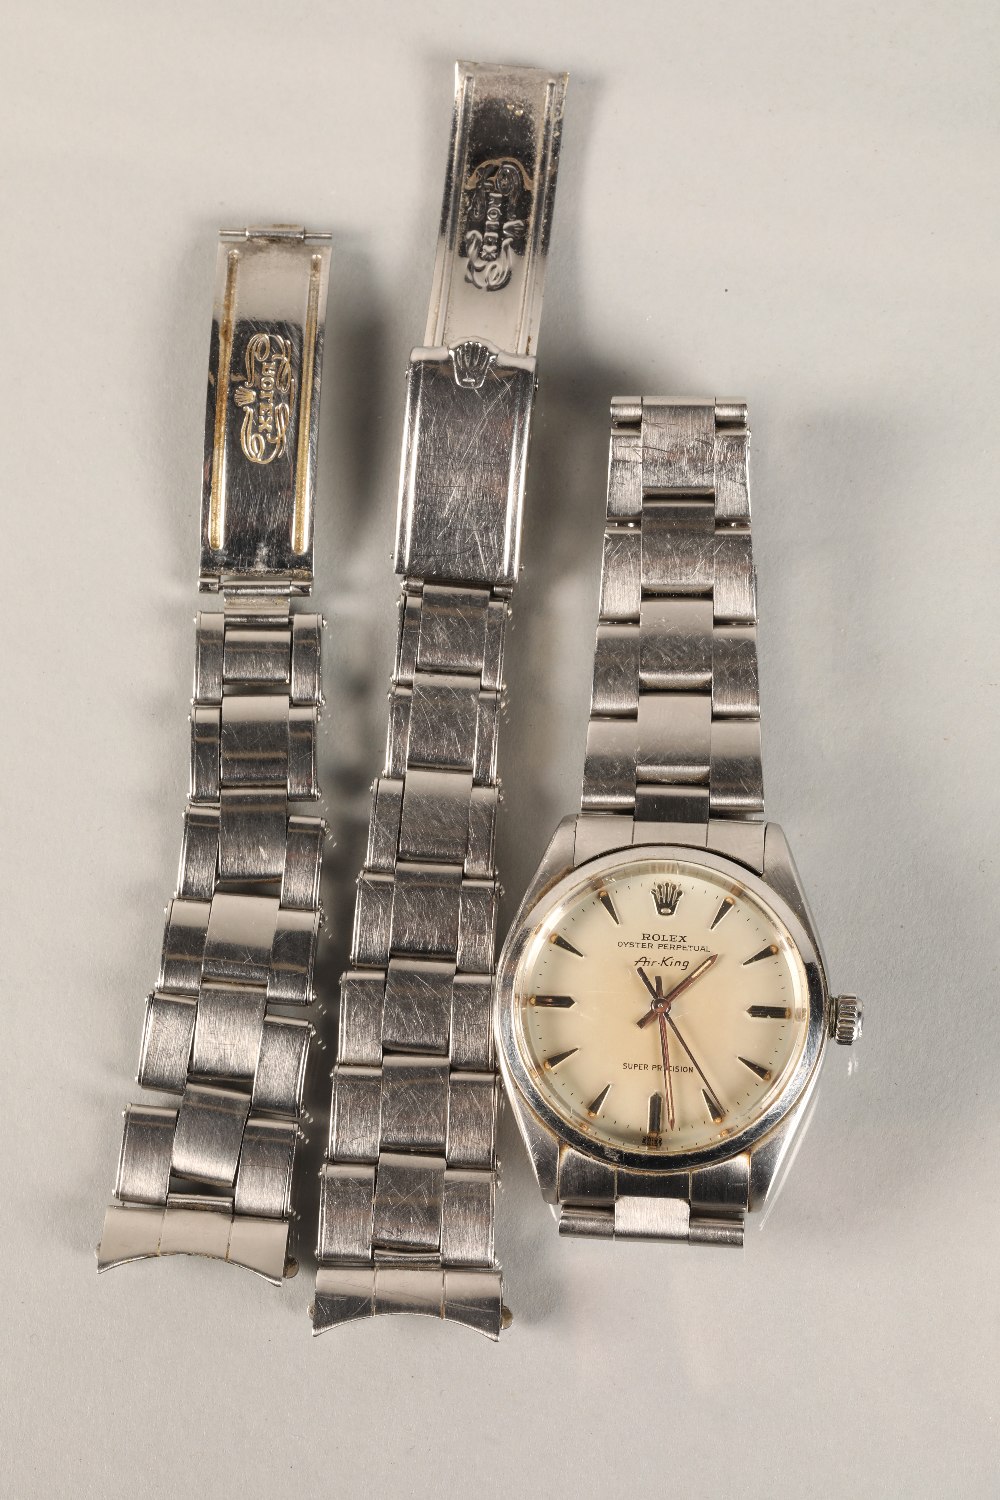 Gents Rolex Oyster Perpetual Air King stainless wrist watch, champagne dial with hour marker batons, - Image 7 of 8